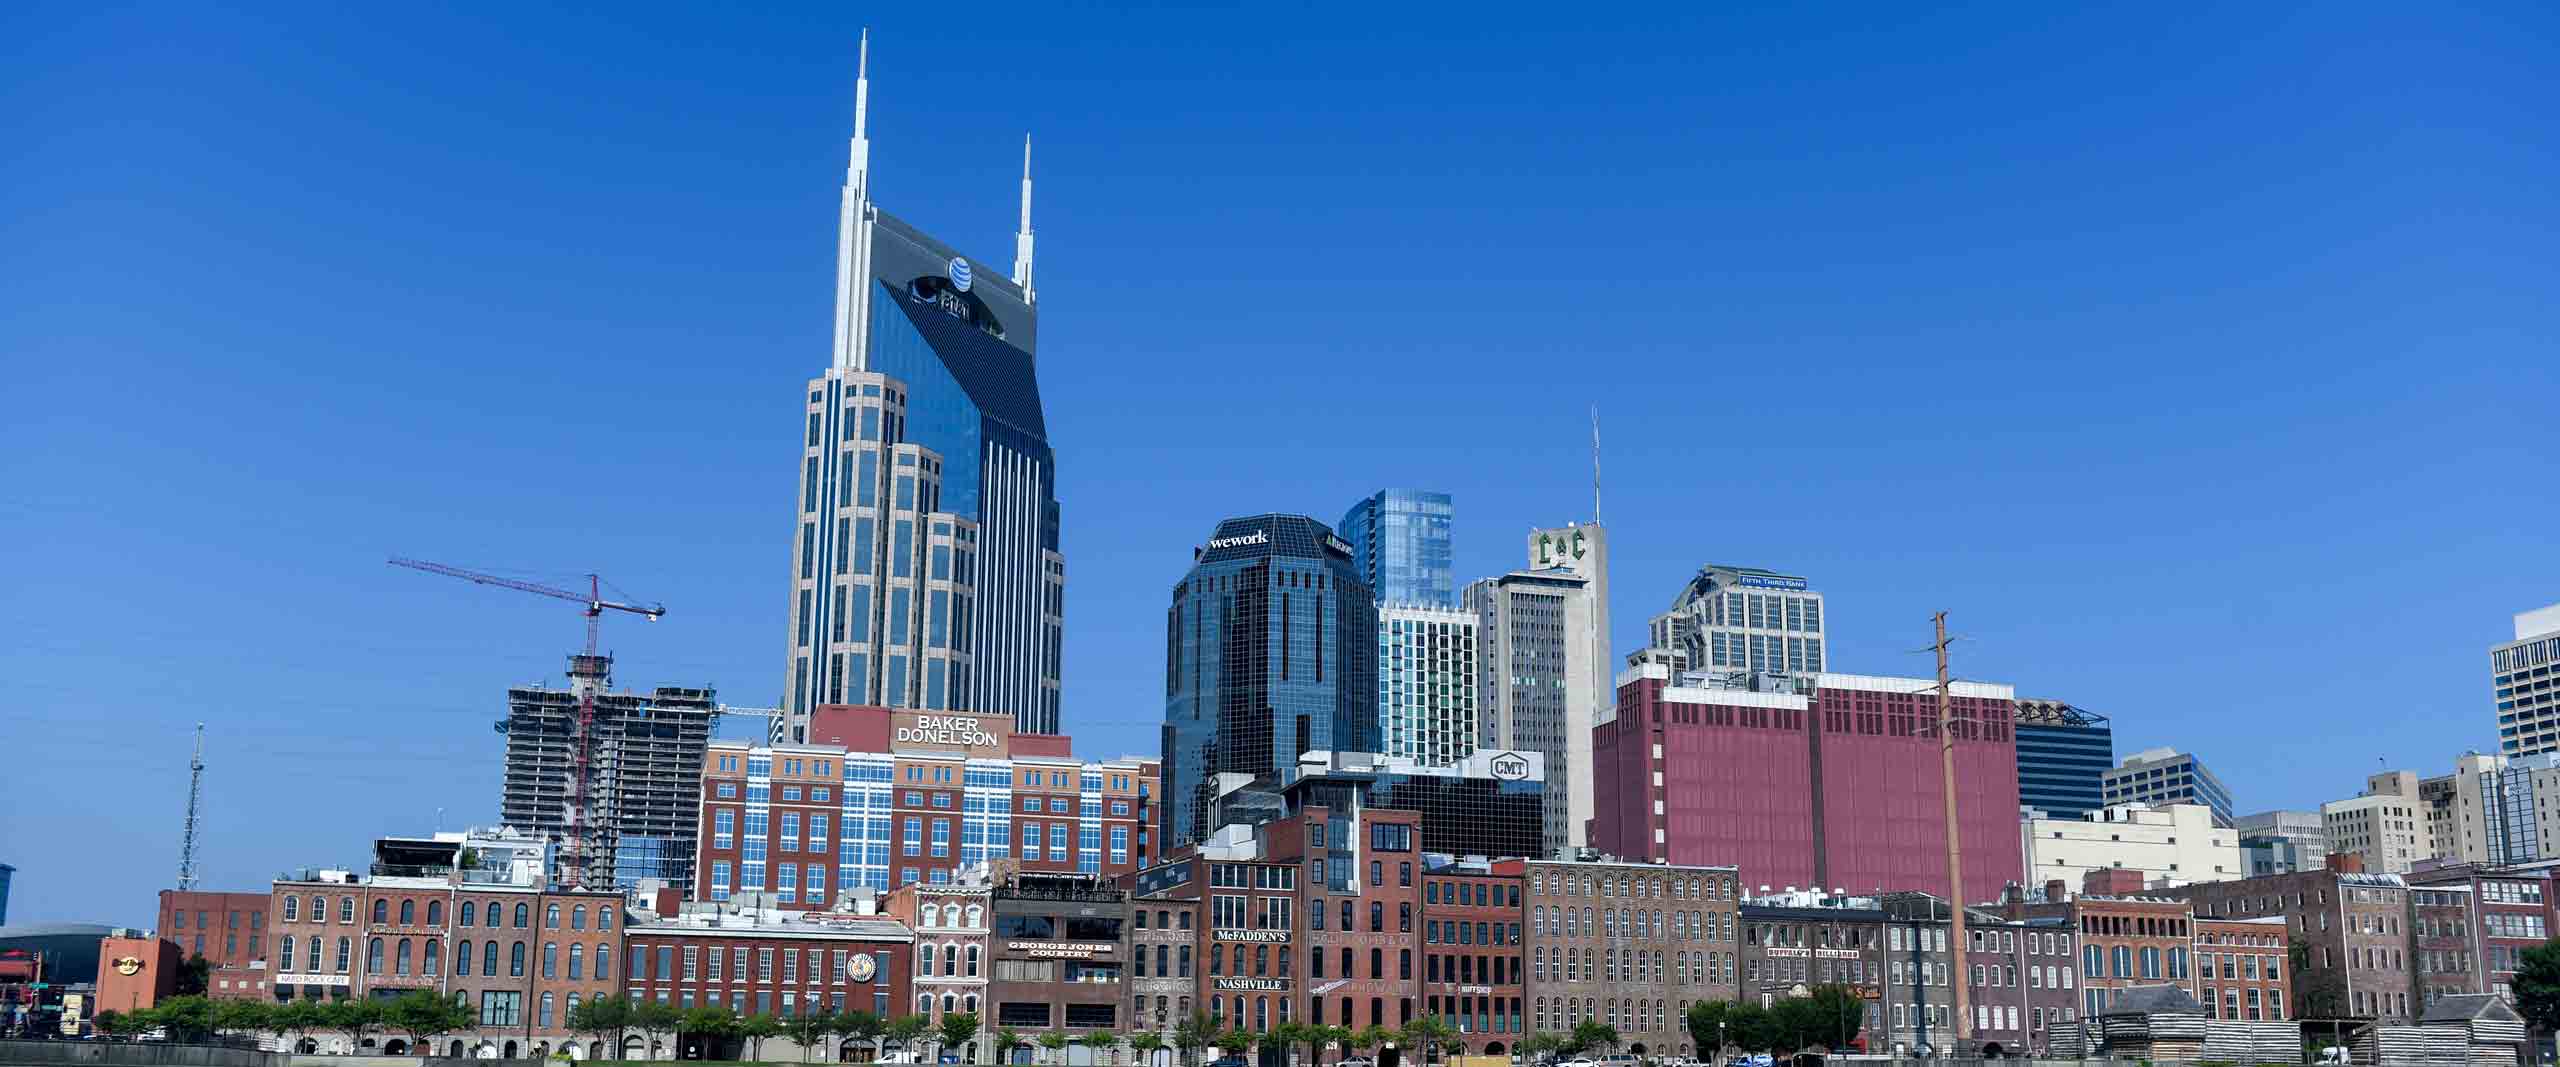 The Nashville Skyline from the east bank of the Cumberland River